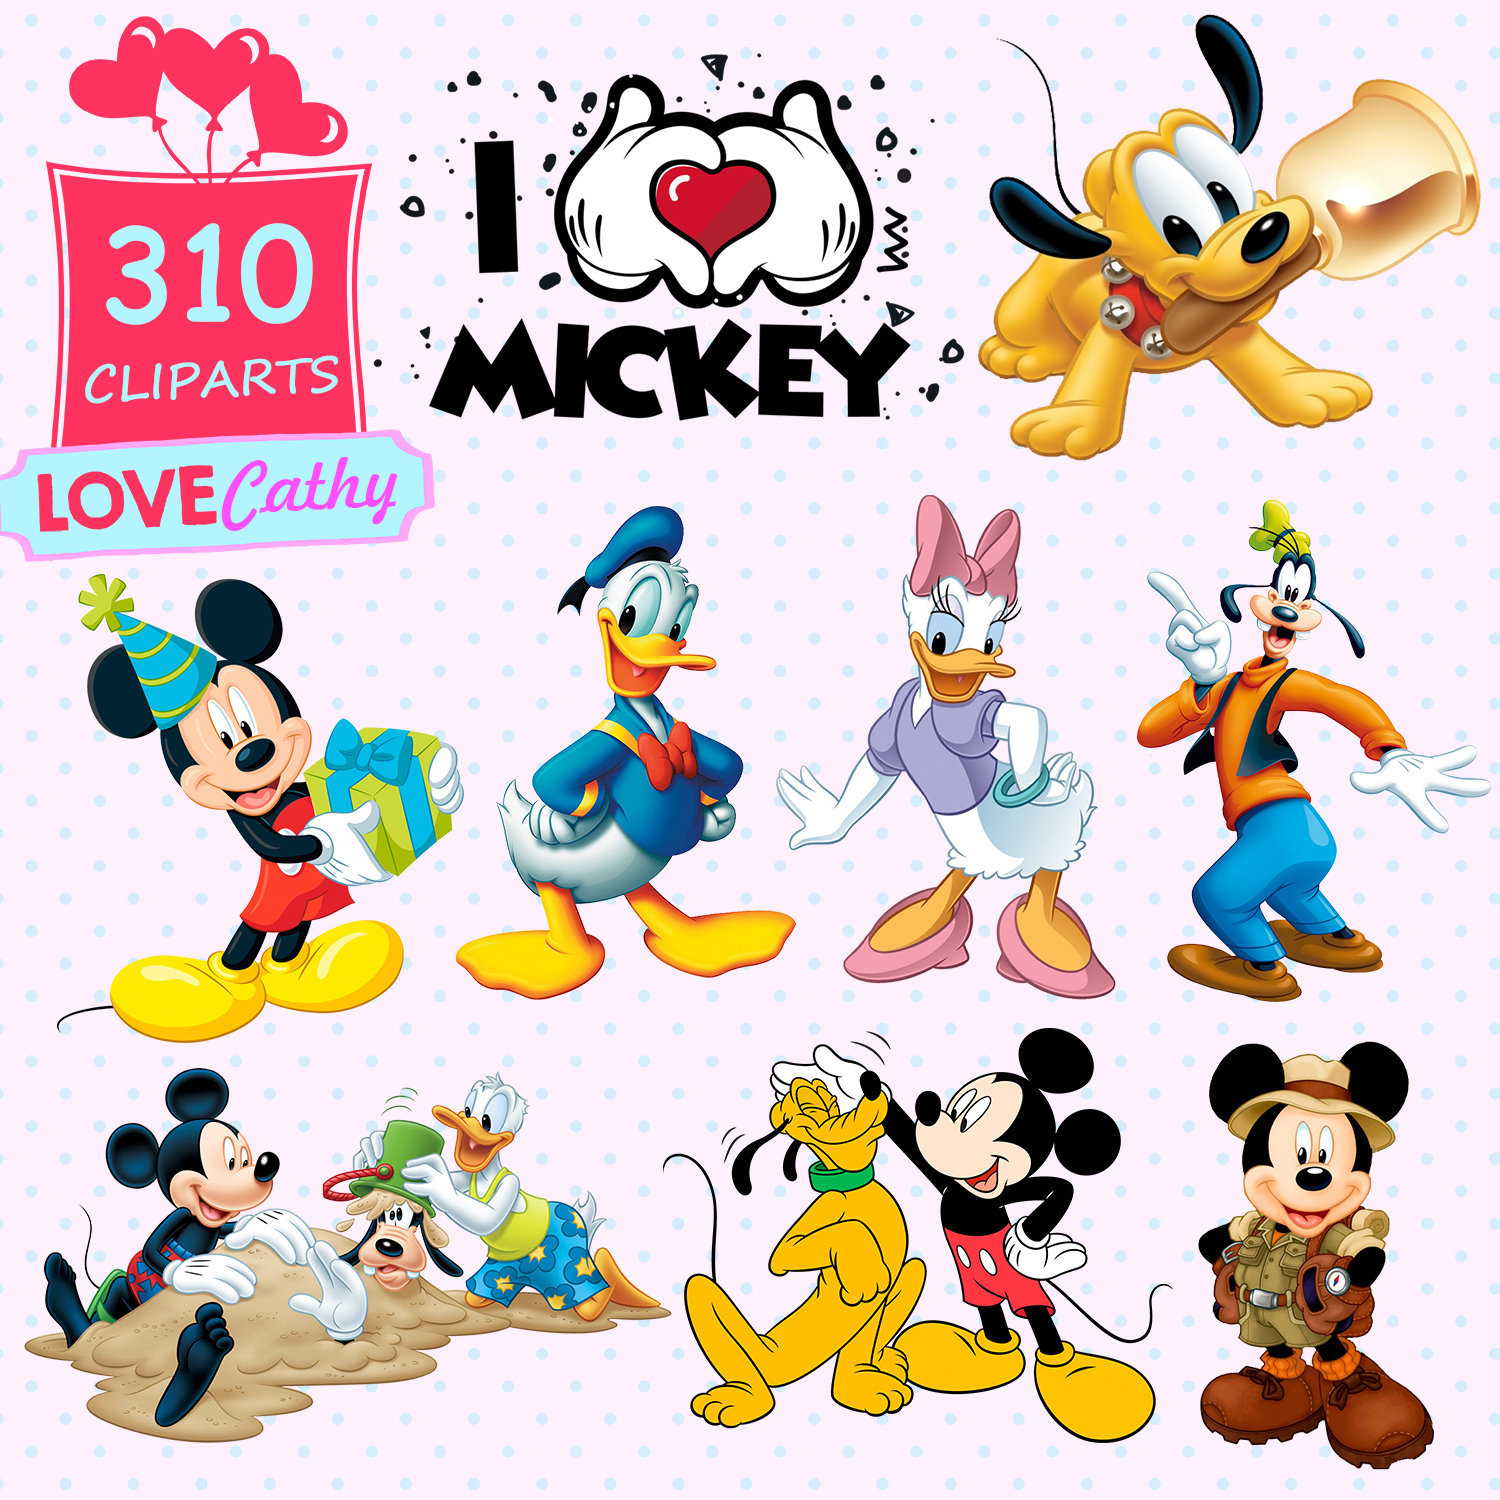 Disney Mickey Mouse Sticker Set ~ Mickey Mouse Sticker Pad with Over 200  Stickers and Bonus Sticker Sheet Featuring Mickey Mouse, Donald Duck,  Minnie